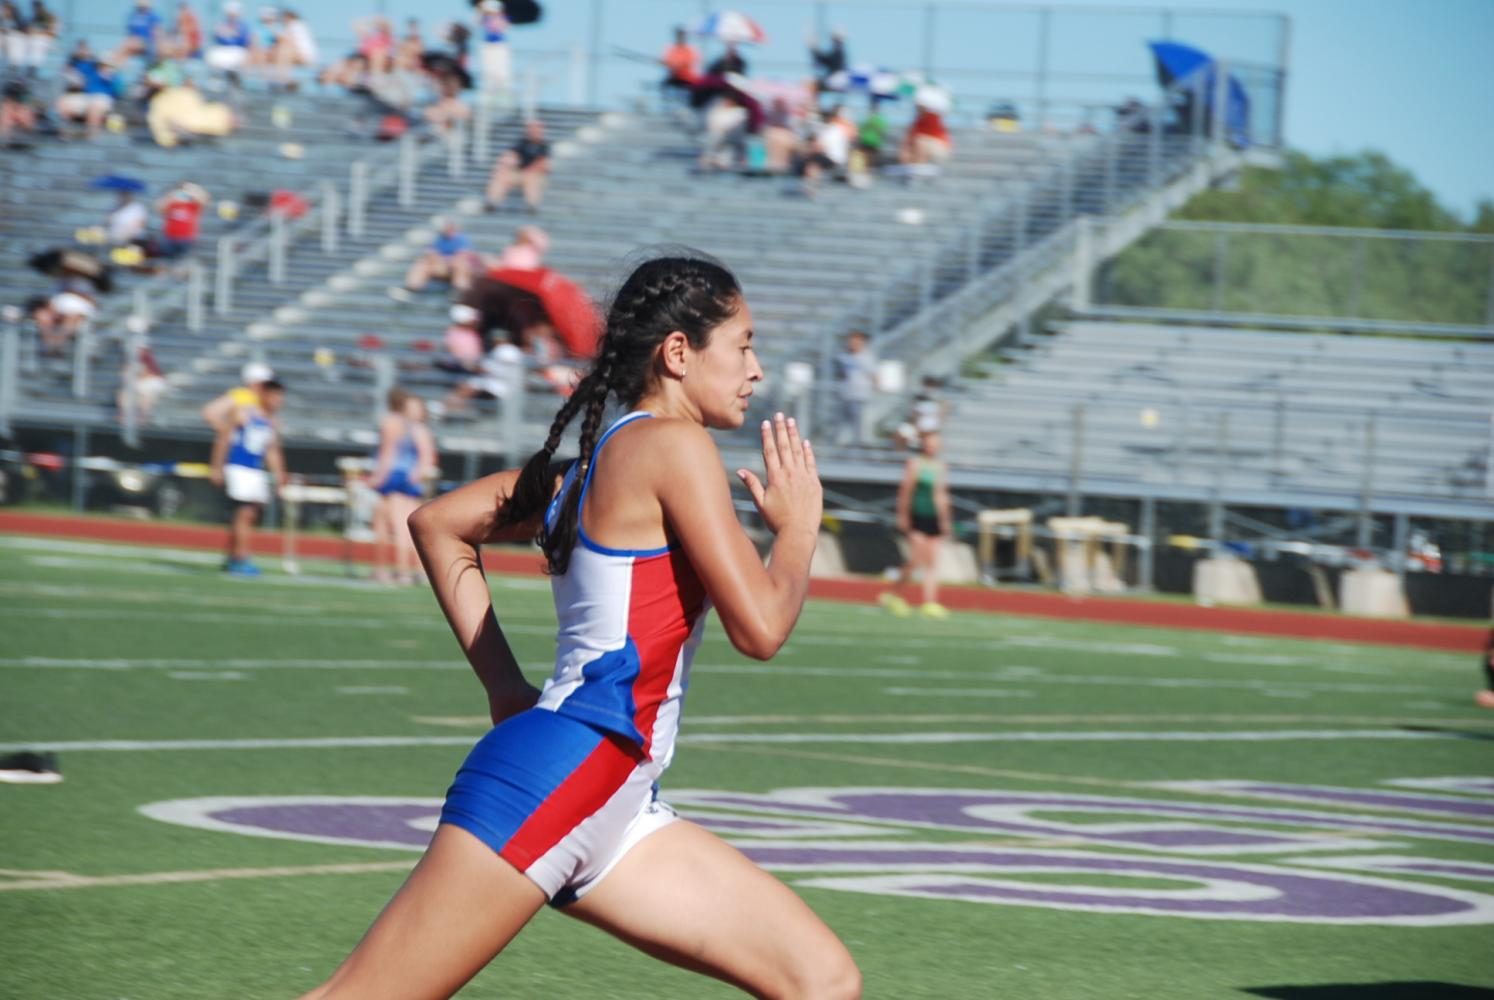 Roca+running+the+400+meter+dash.+She+has+been+running+track+since+the+seventh+grade.